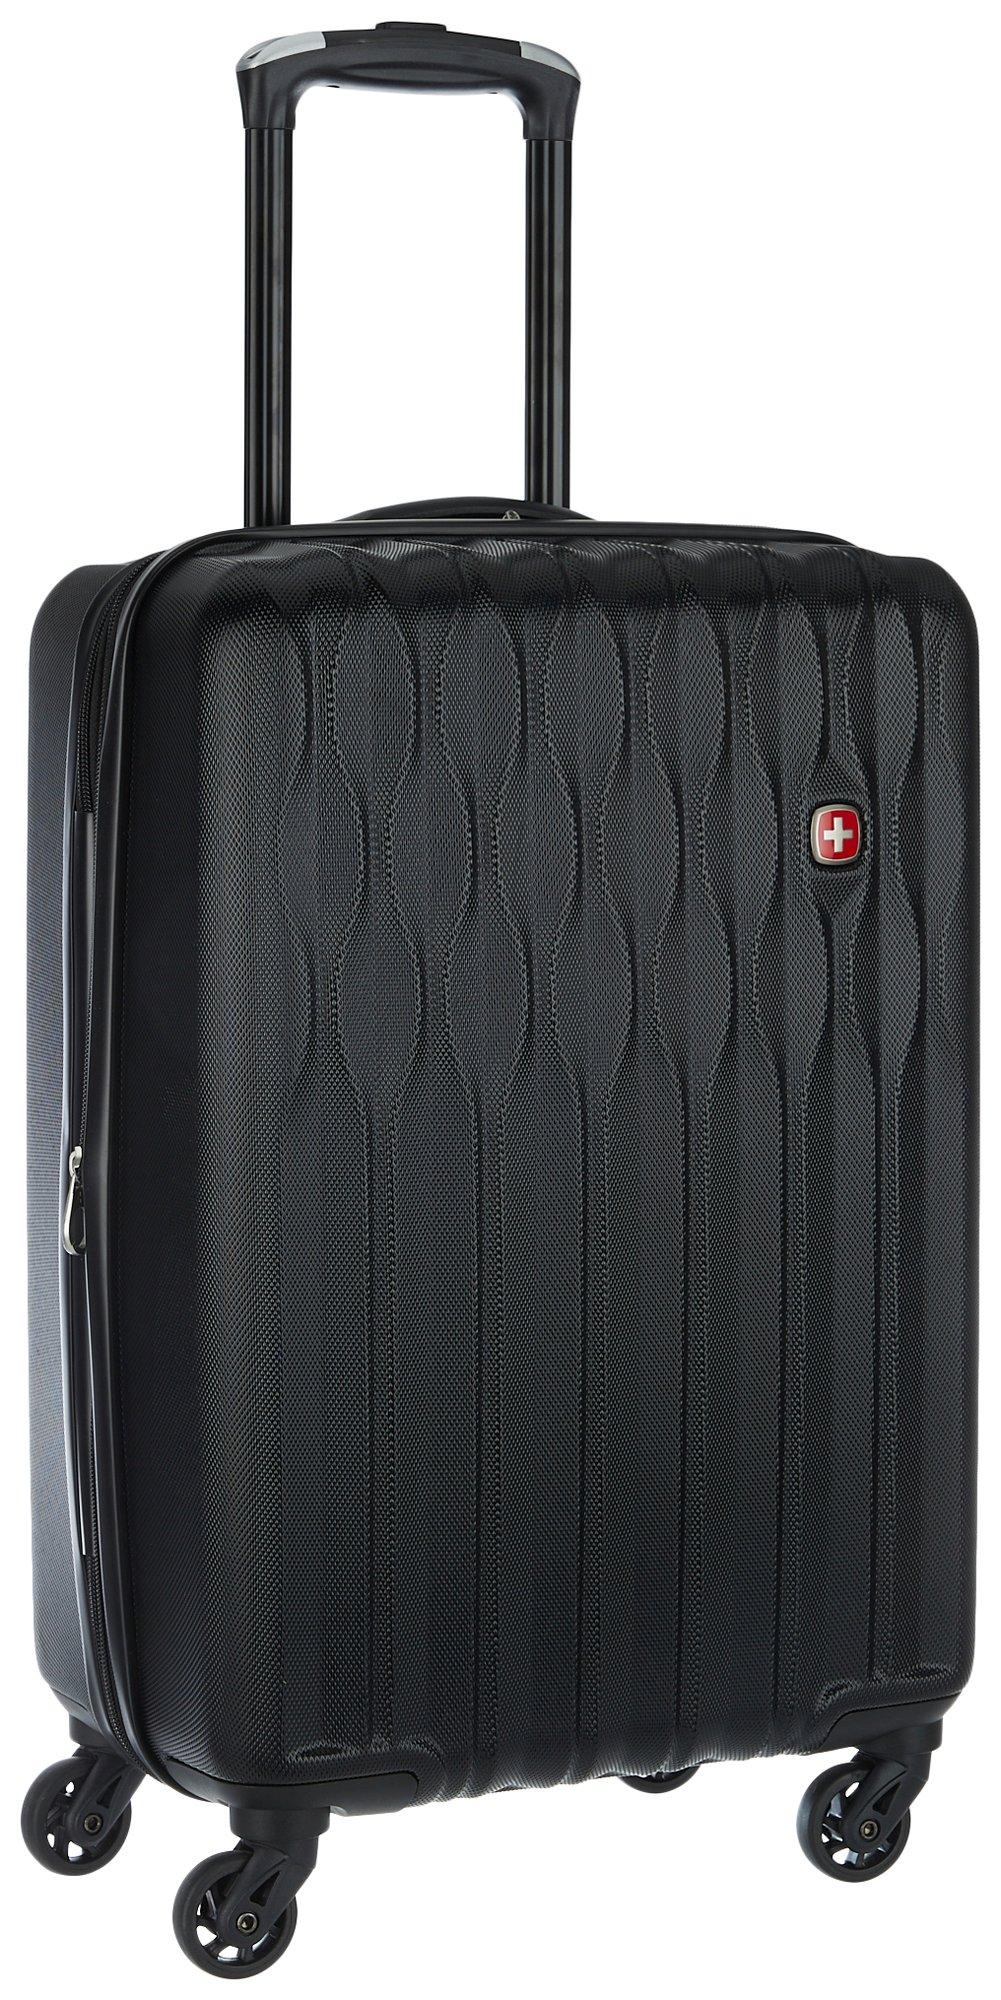 Swiss Gear 20'' 8018 Expandable Hardside Spinner Luggage